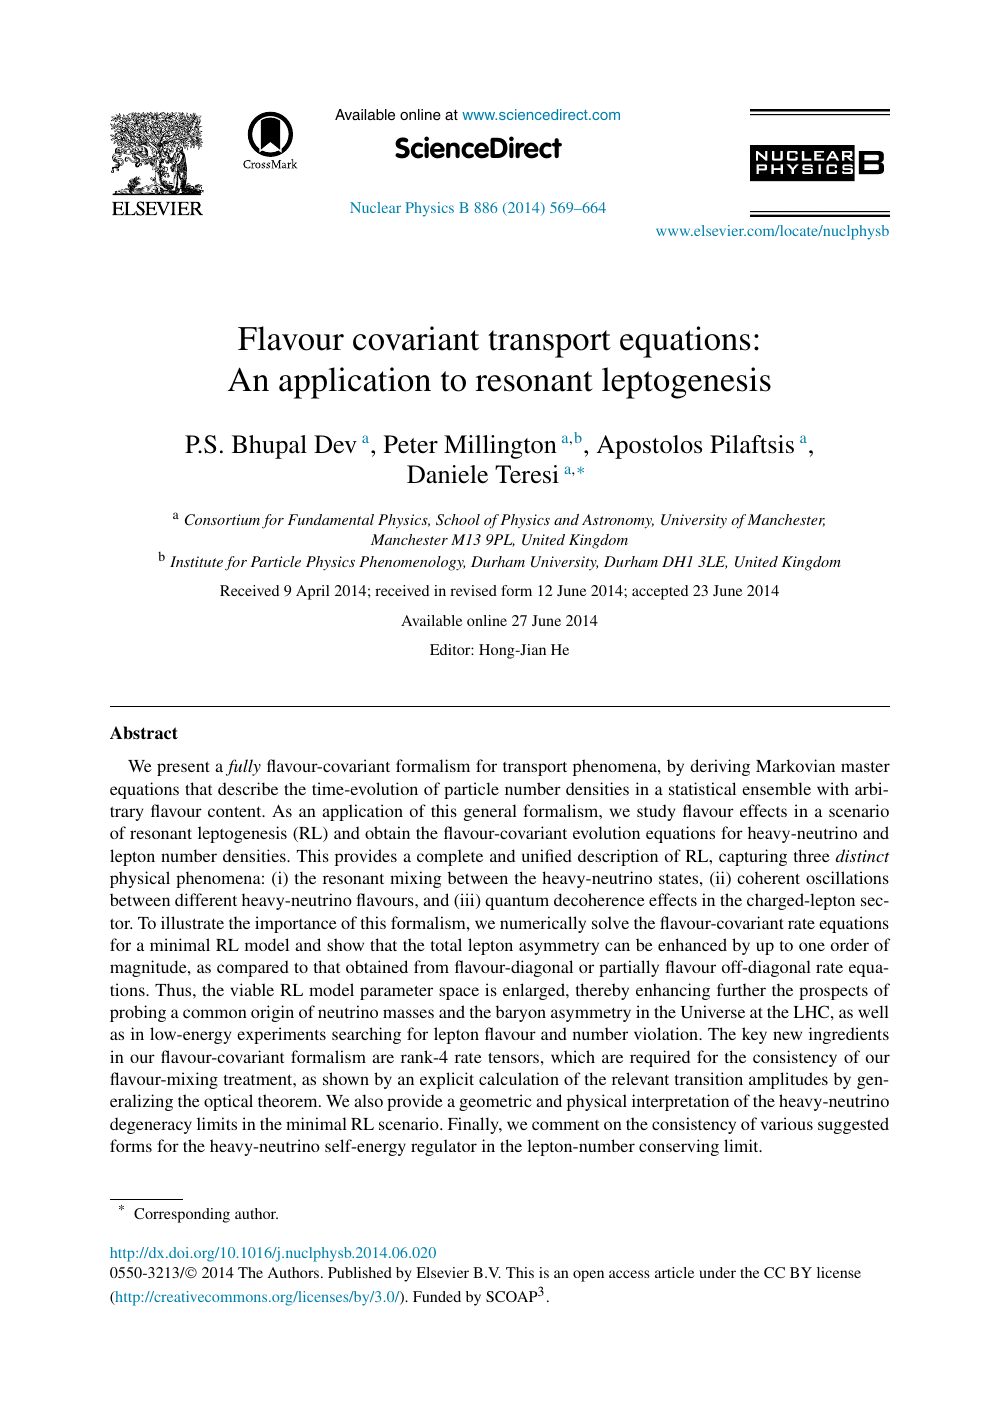 Flavour covariant transport equations: An application to resonant